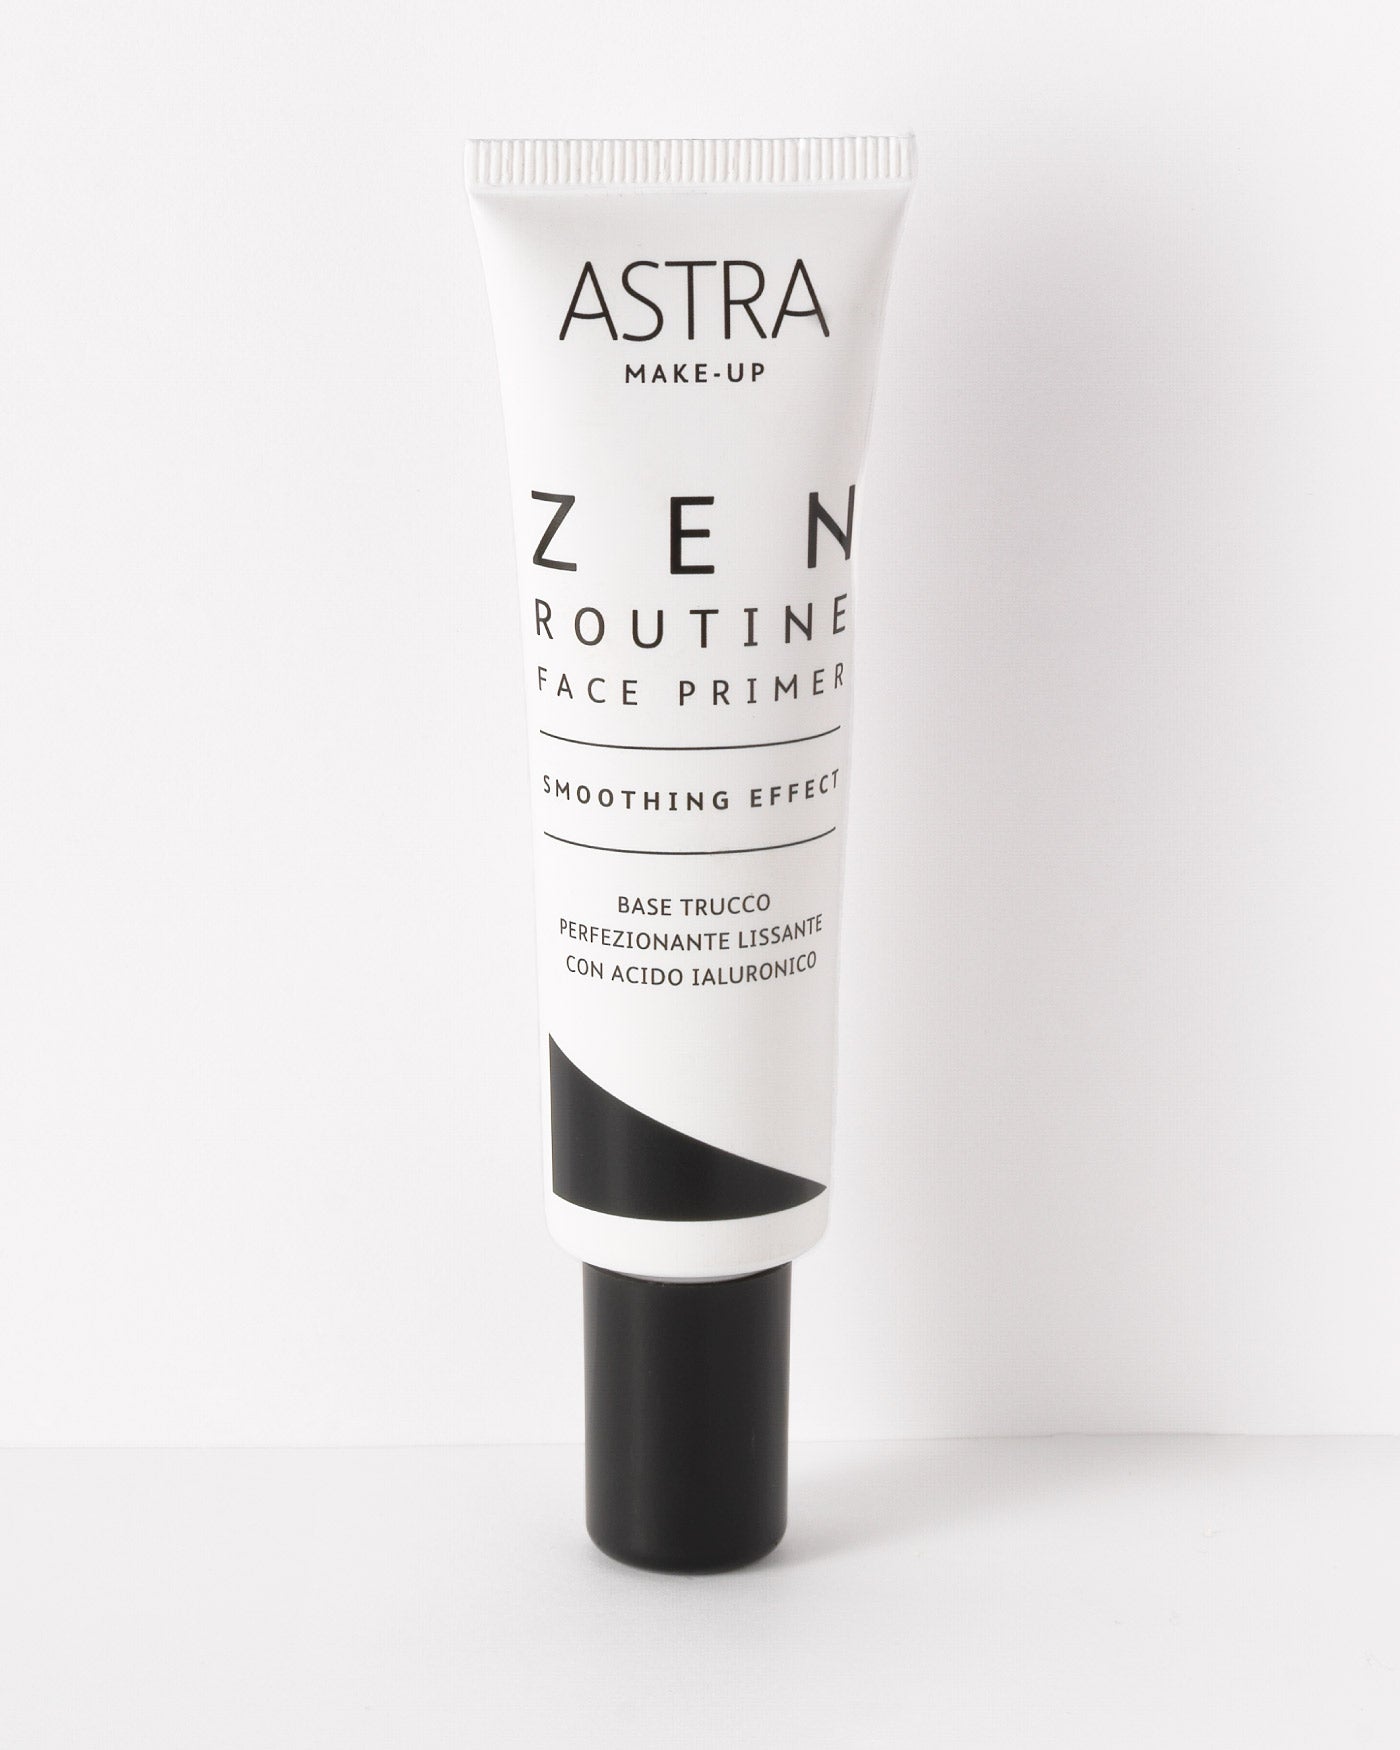 ZEN ROUTINE FACE PRIMER SMOOTHING EFFECT - Face - Astra Make-Up